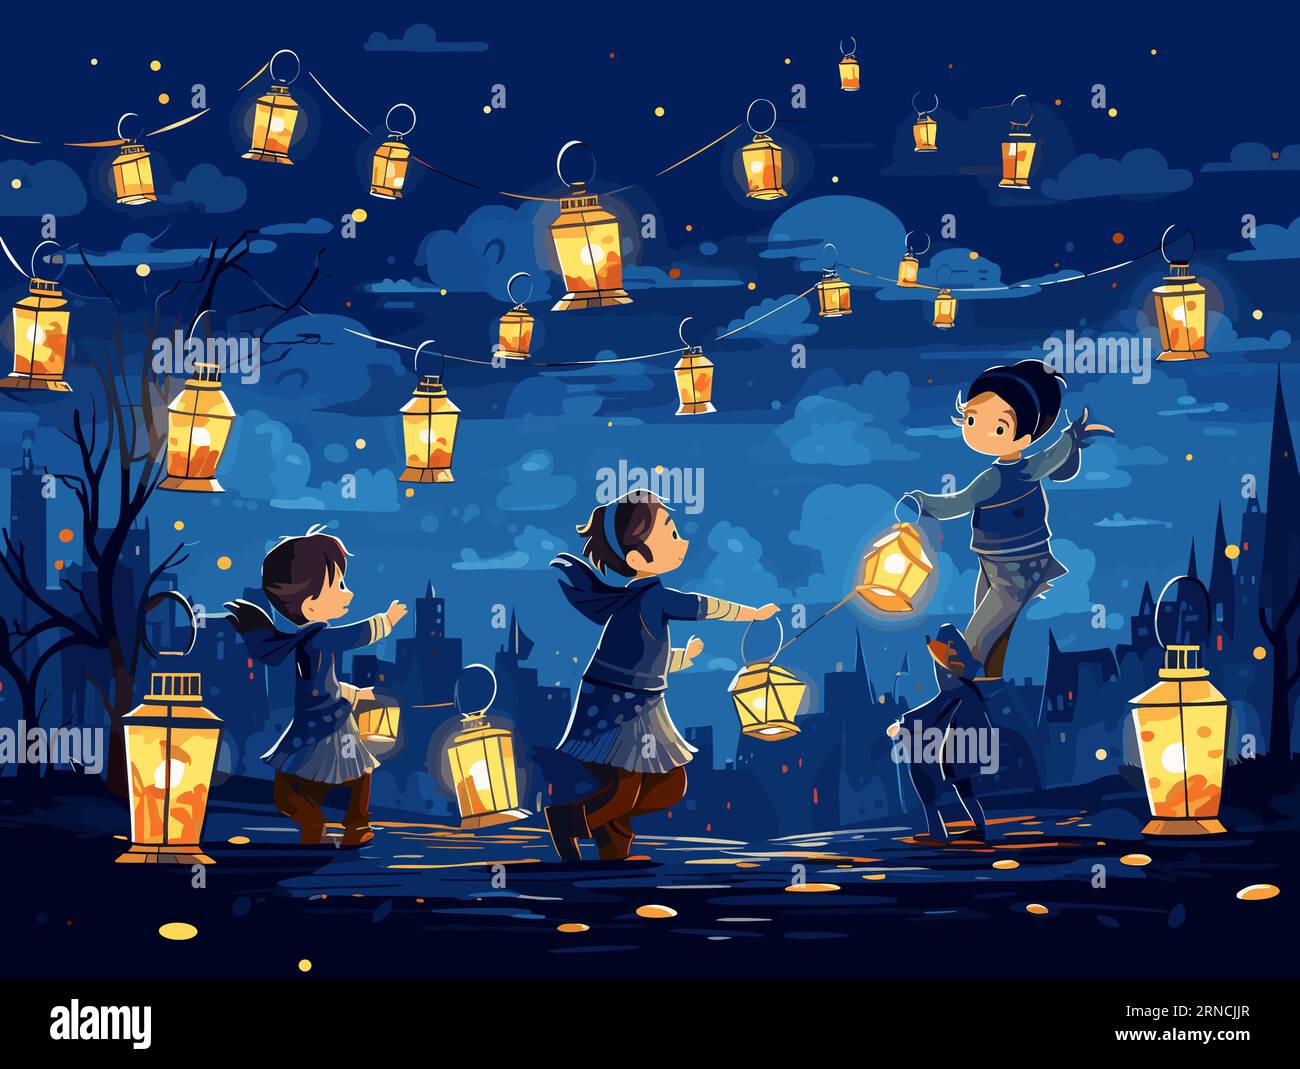 Kids With Lanterns Under Moon Image, In The Style Of Light Navy, Lively Group Compositions, Traditional Costumes, Rinpa School, Light Indigo And Dark Stock Vector